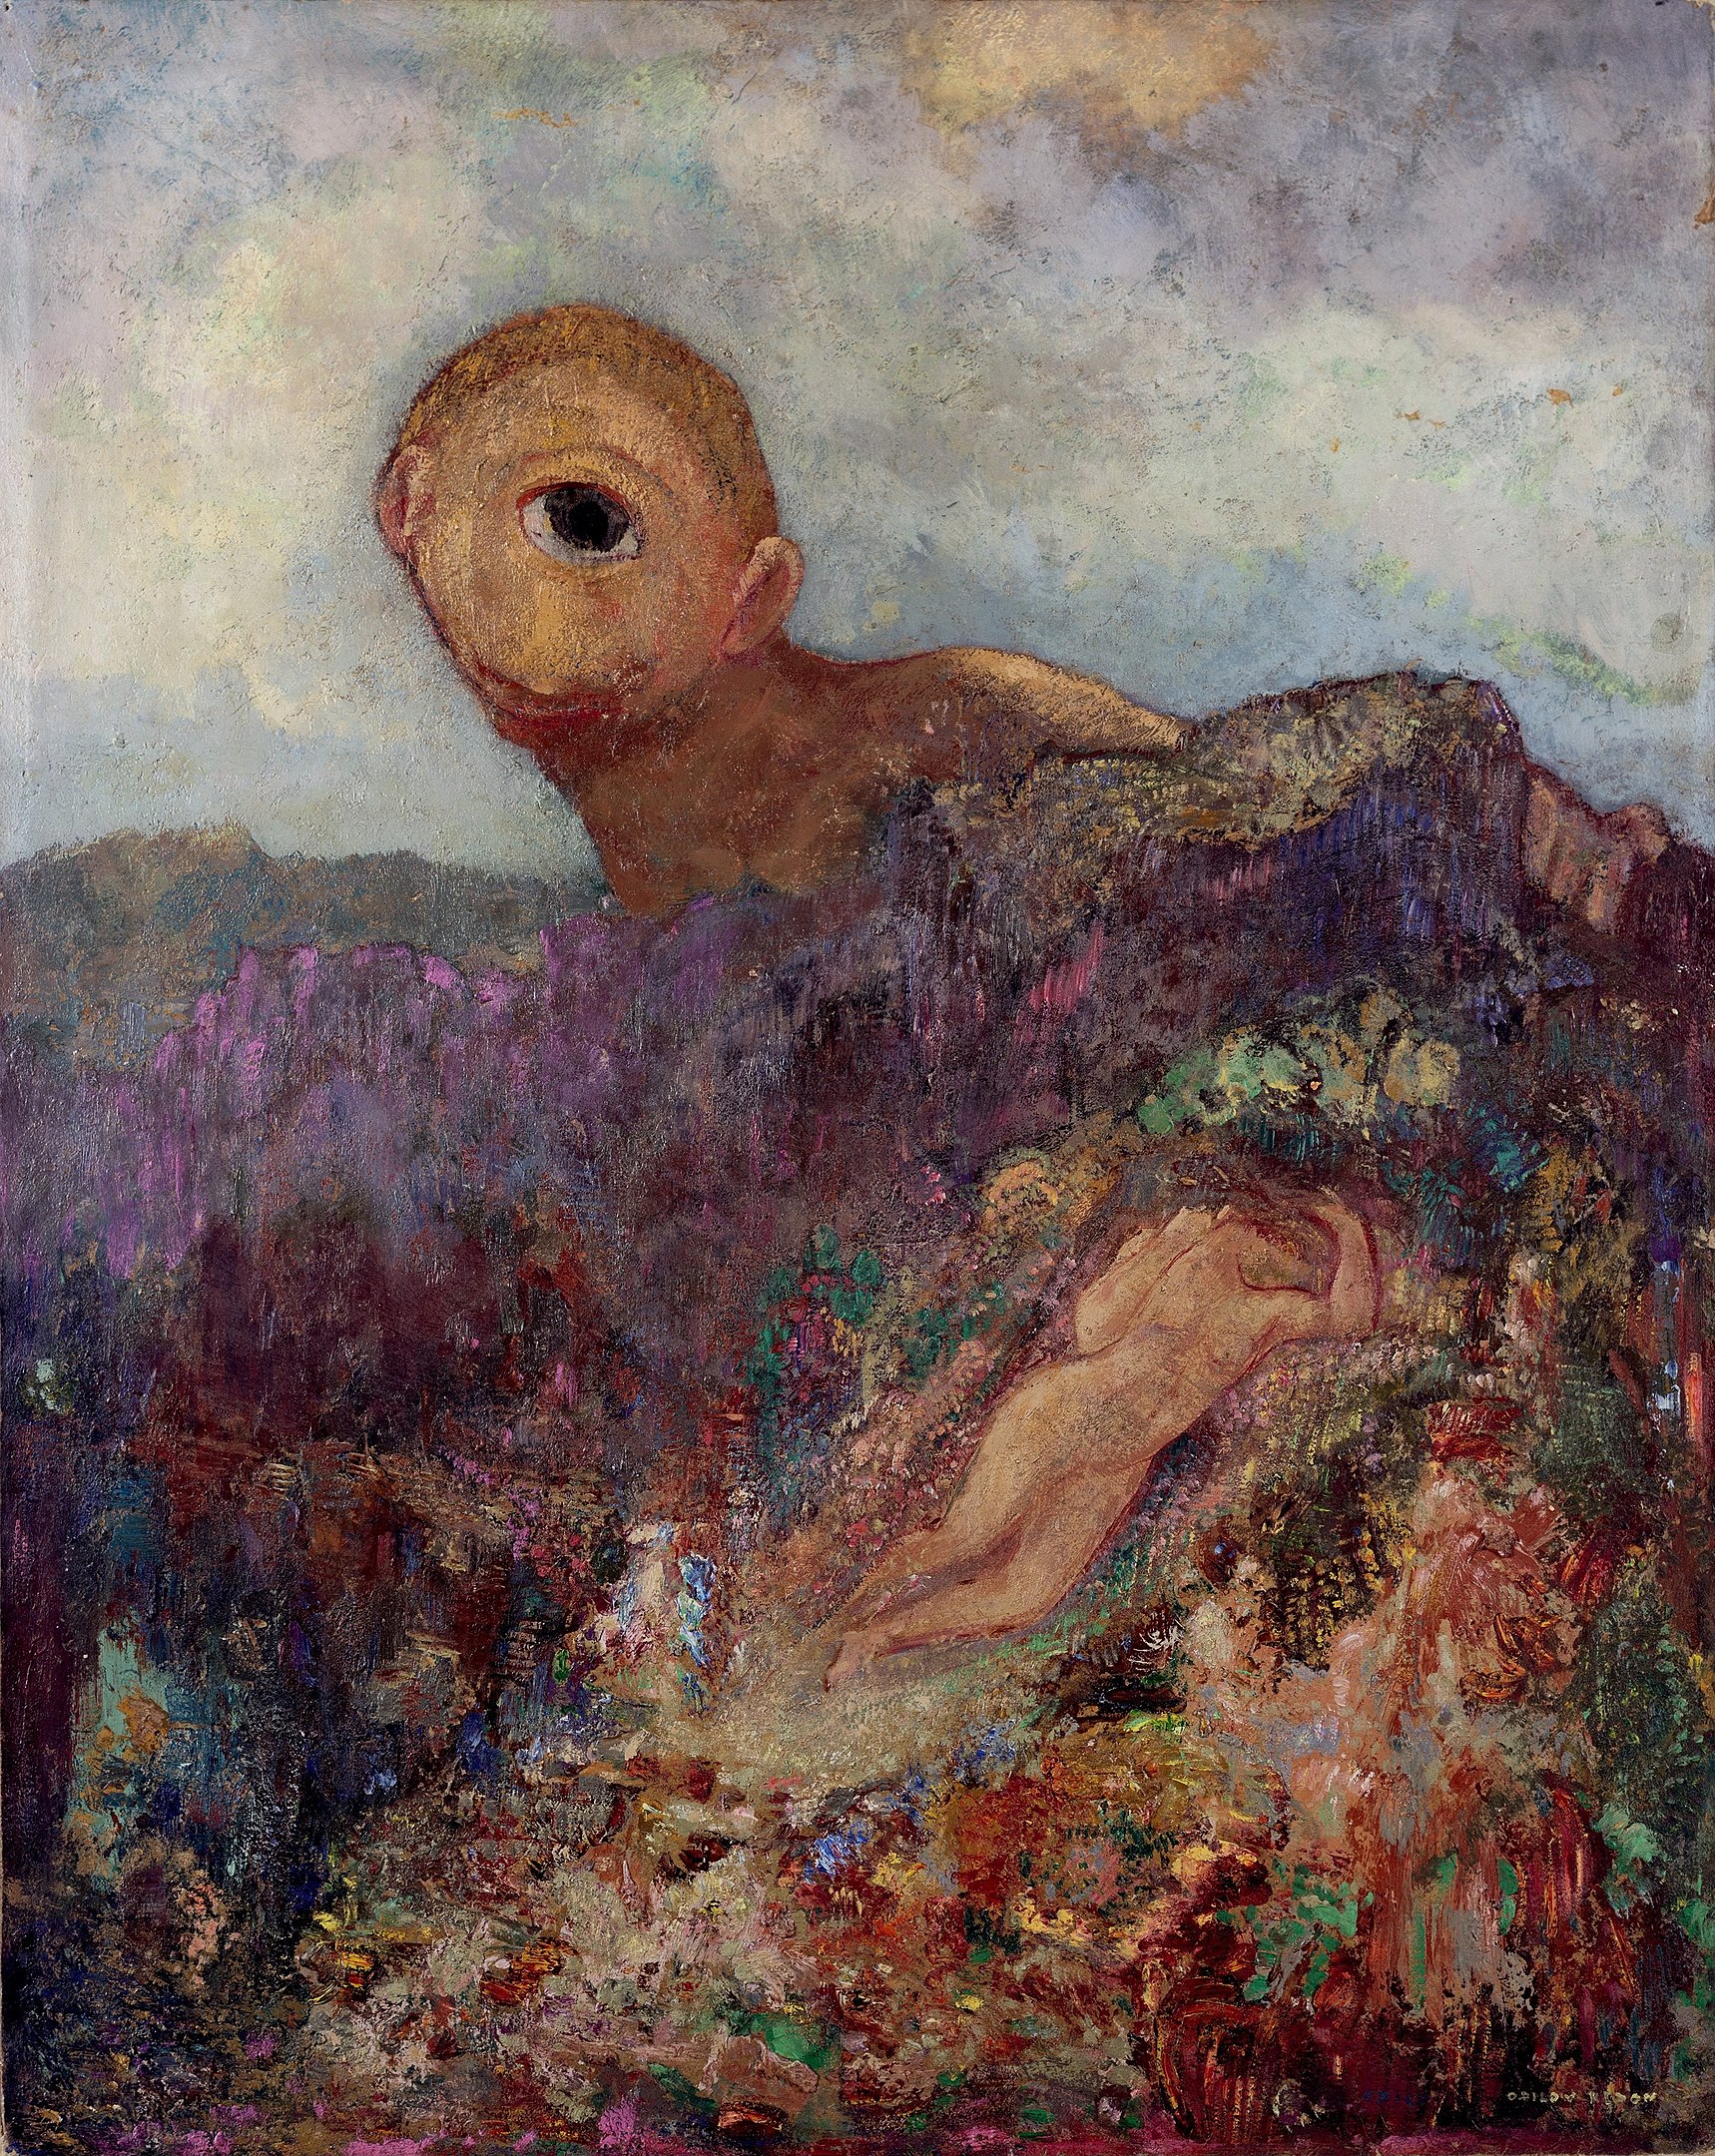 An abstract mythical creature with one eye towering above a landscape as a nude woman lays surrounded by foliage in the foreground